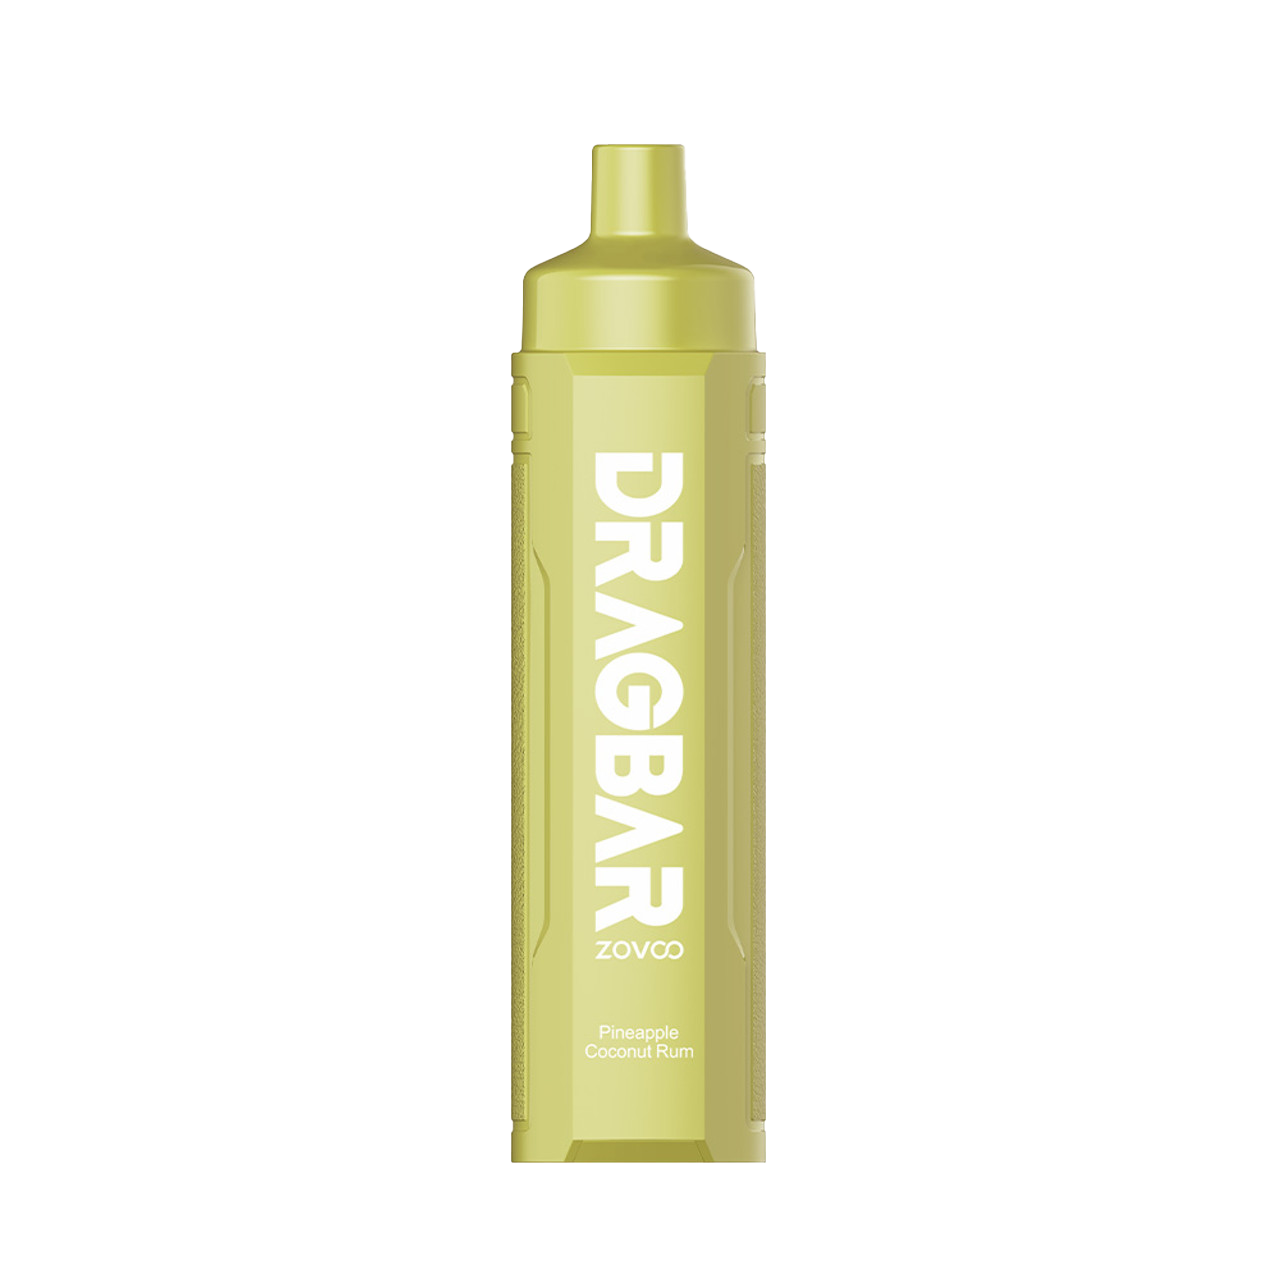 ZoVoo DragBar R6000 Disposable Rechargeable Vape - Pineapple Coconut Rum